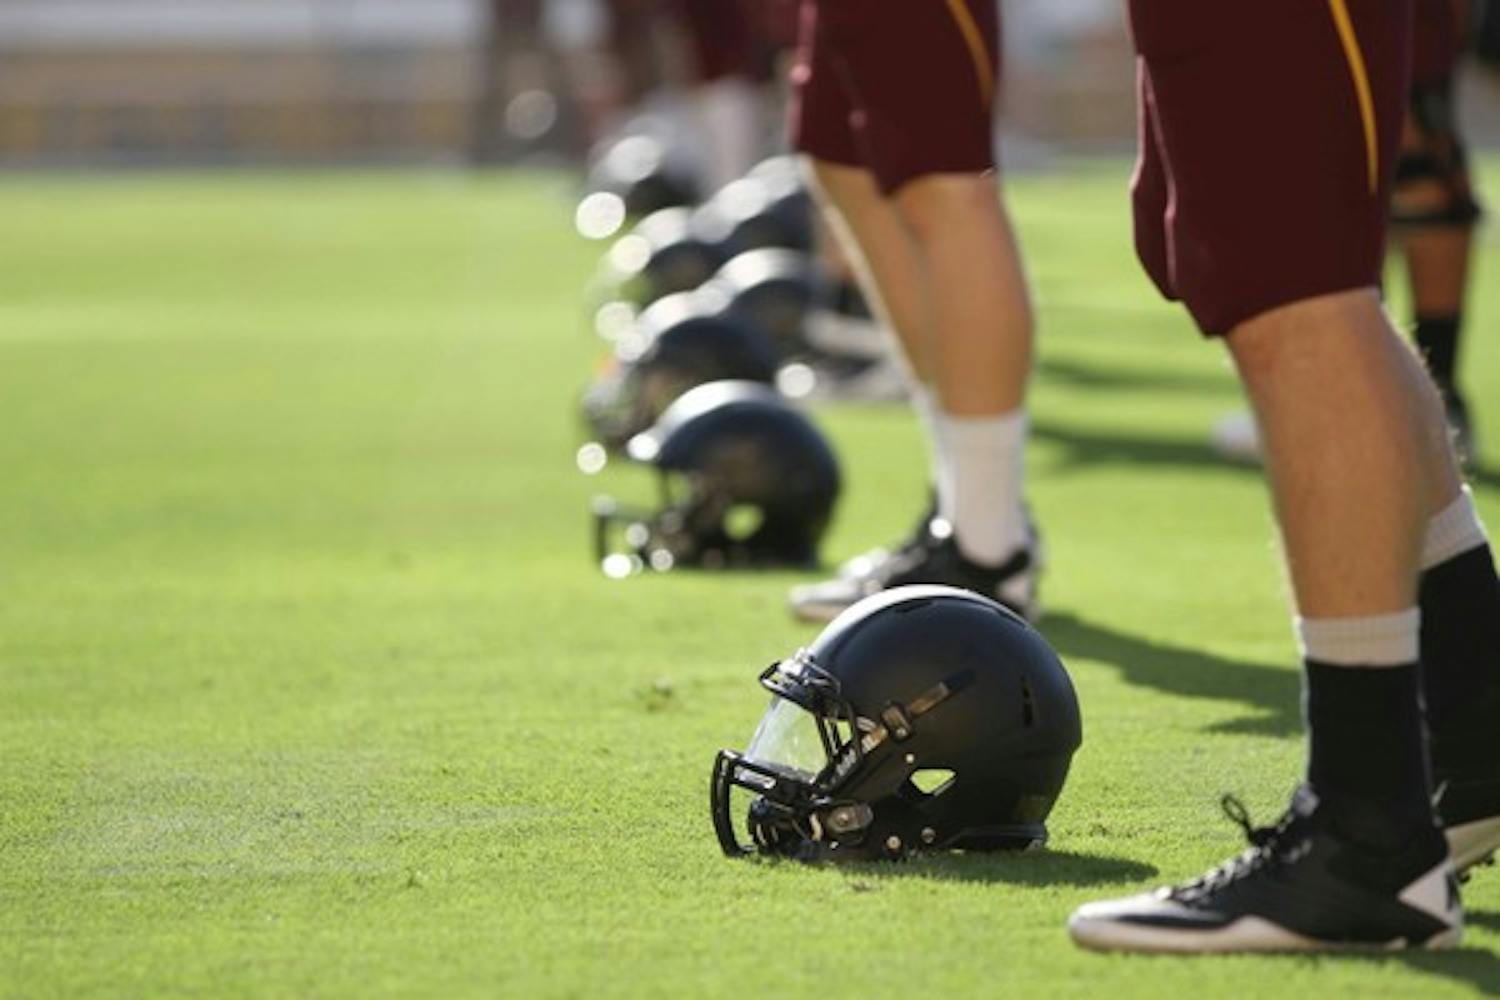 GEARING UP: ASU football players line up during a drill before last Saturday's scrimmage.  The Sun Devils will take the field for the first time this season Thursday night against UC Davis. (Photo by Lisa Bartoli)